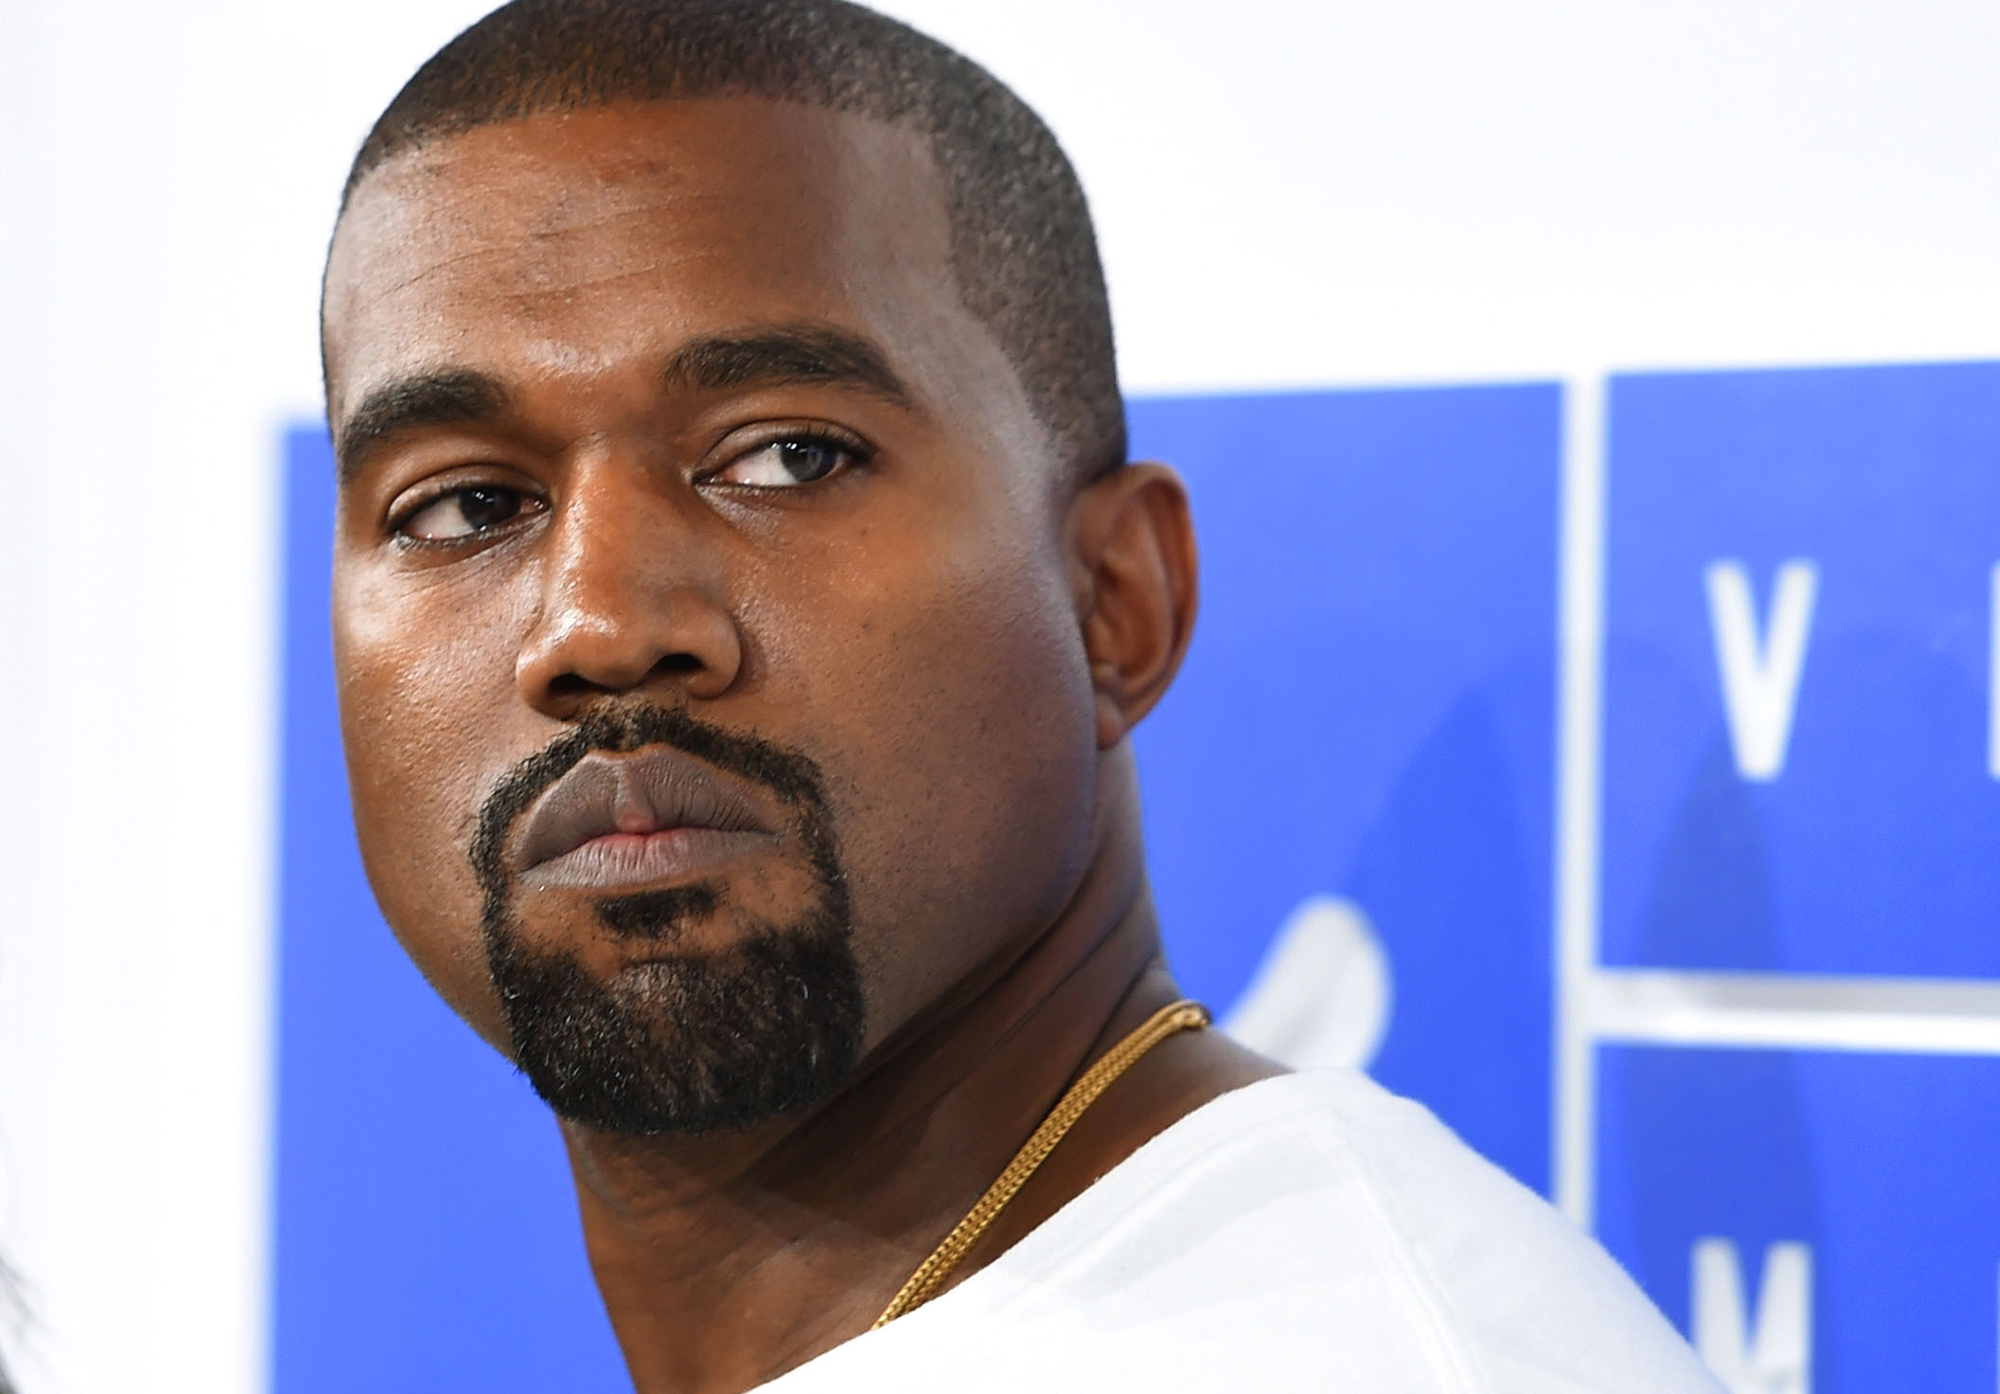 Kanye West Is 'Focused' on Apparel Line Launch, Gap CEO Says - Bloomberg